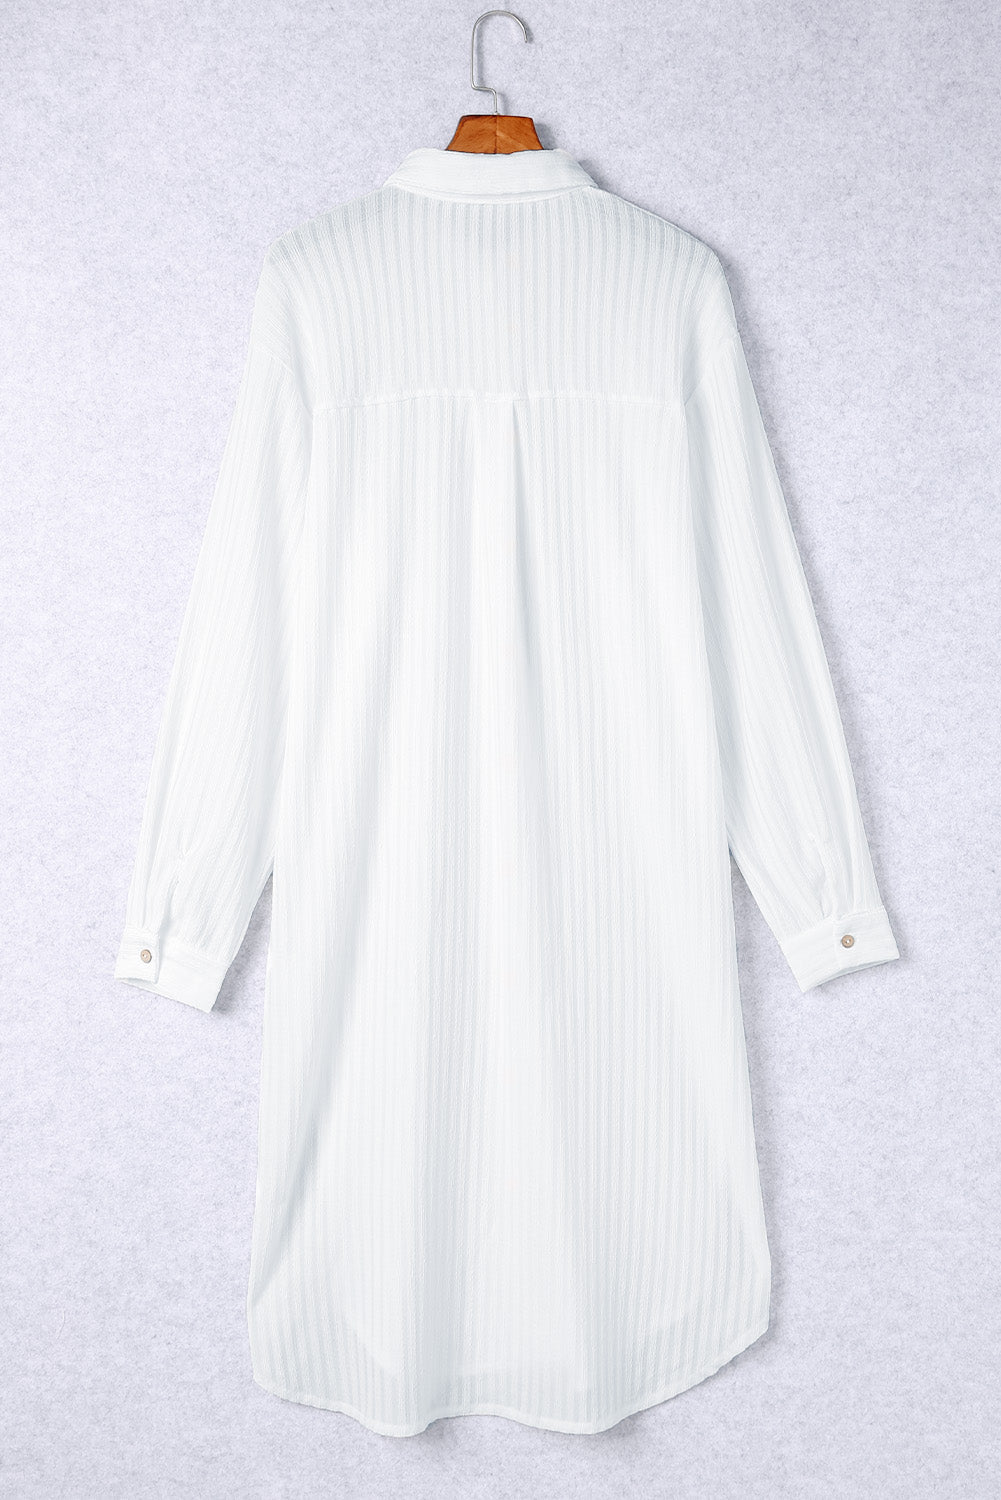 White Striped Crinkle Button Front Cover Up Shirt Dress